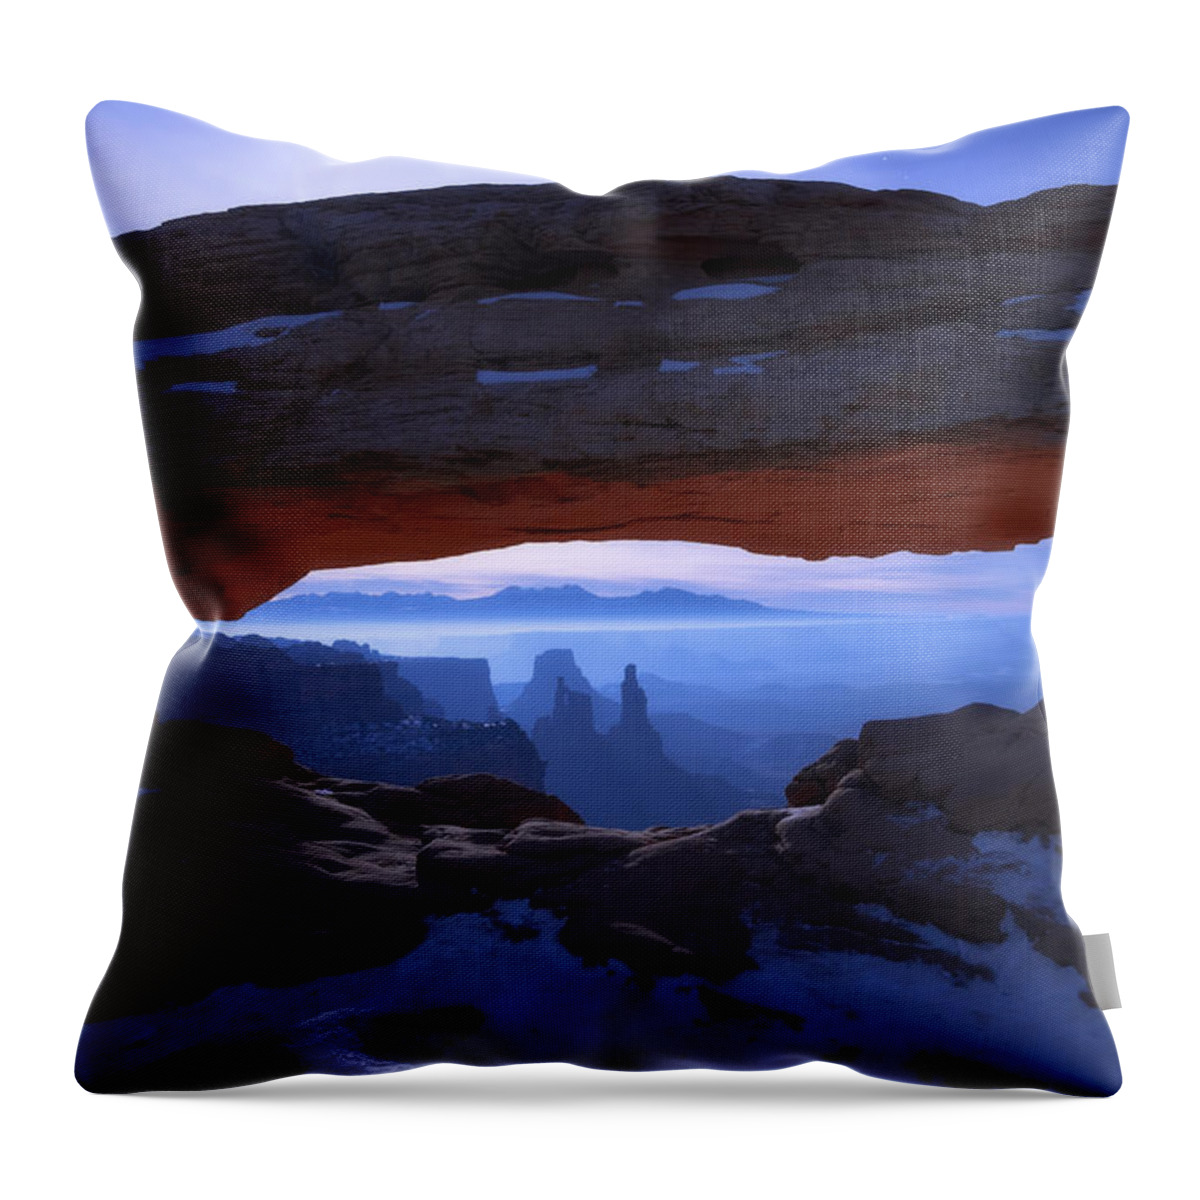 Moonlit Mesa Throw Pillow featuring the photograph Moonlit Mesa by Chad Dutson